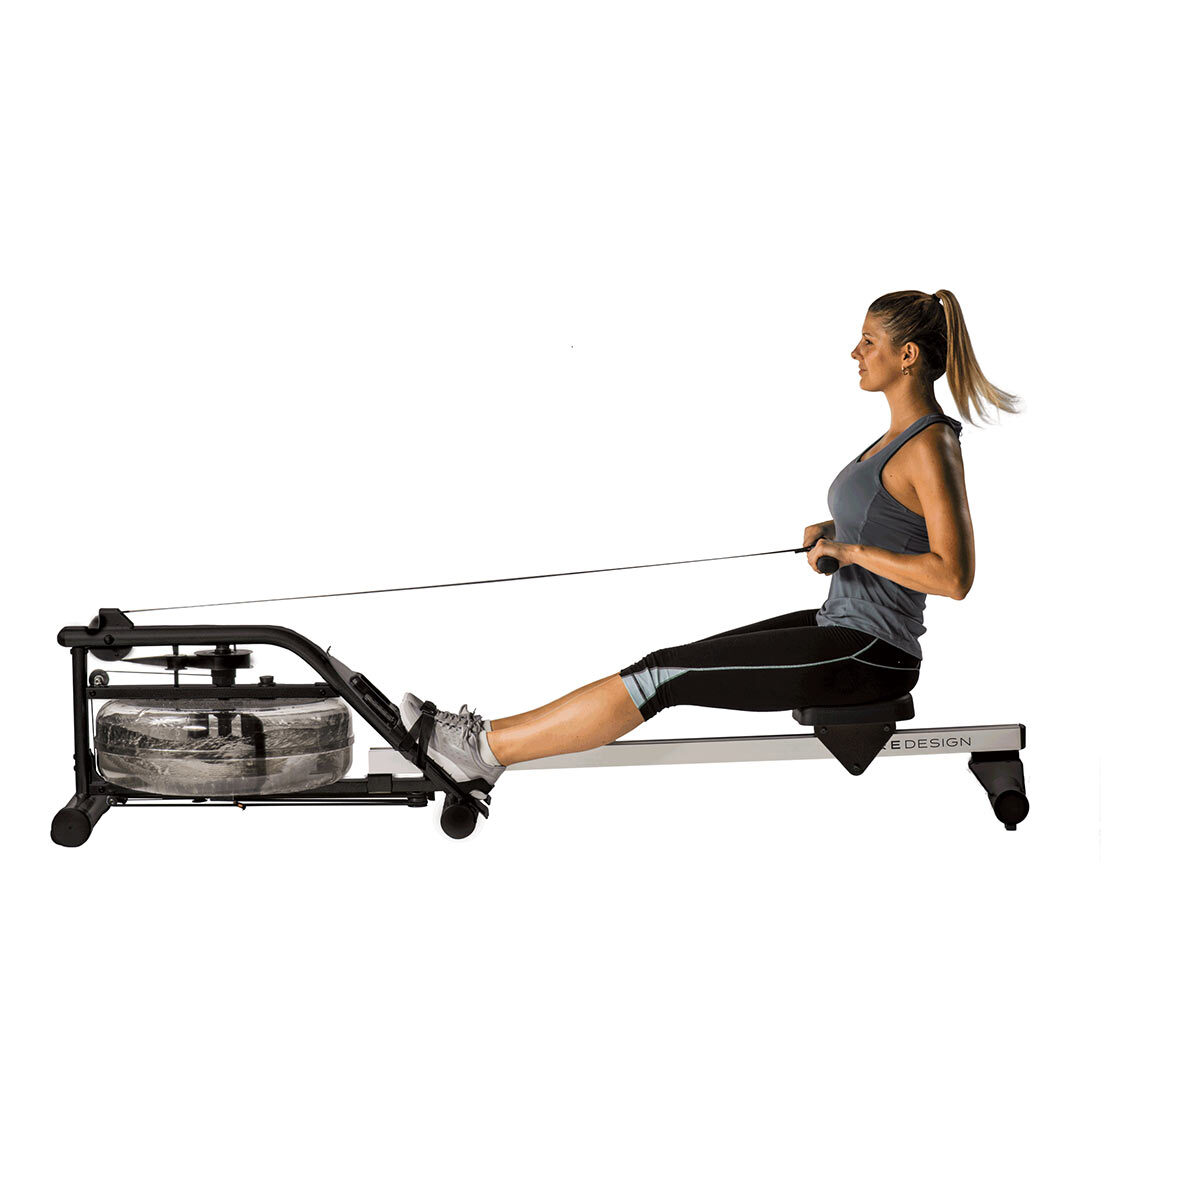 Best Water Rowing Machine Shop Clearance, Save 70% | jlcatj.gob.mx